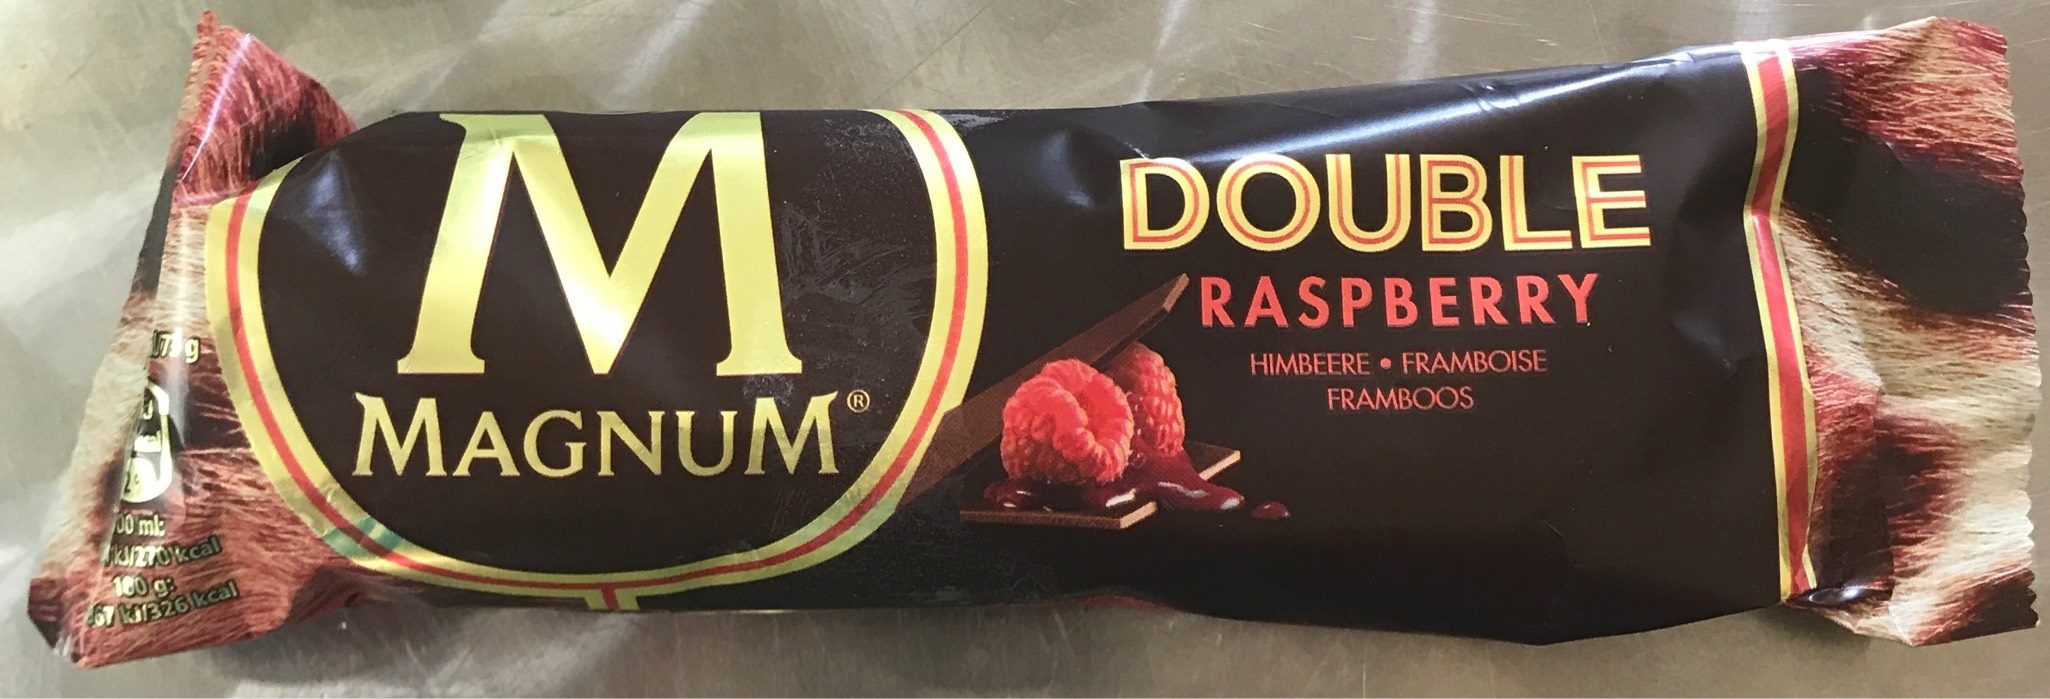 Double Raspberry - Product - fr